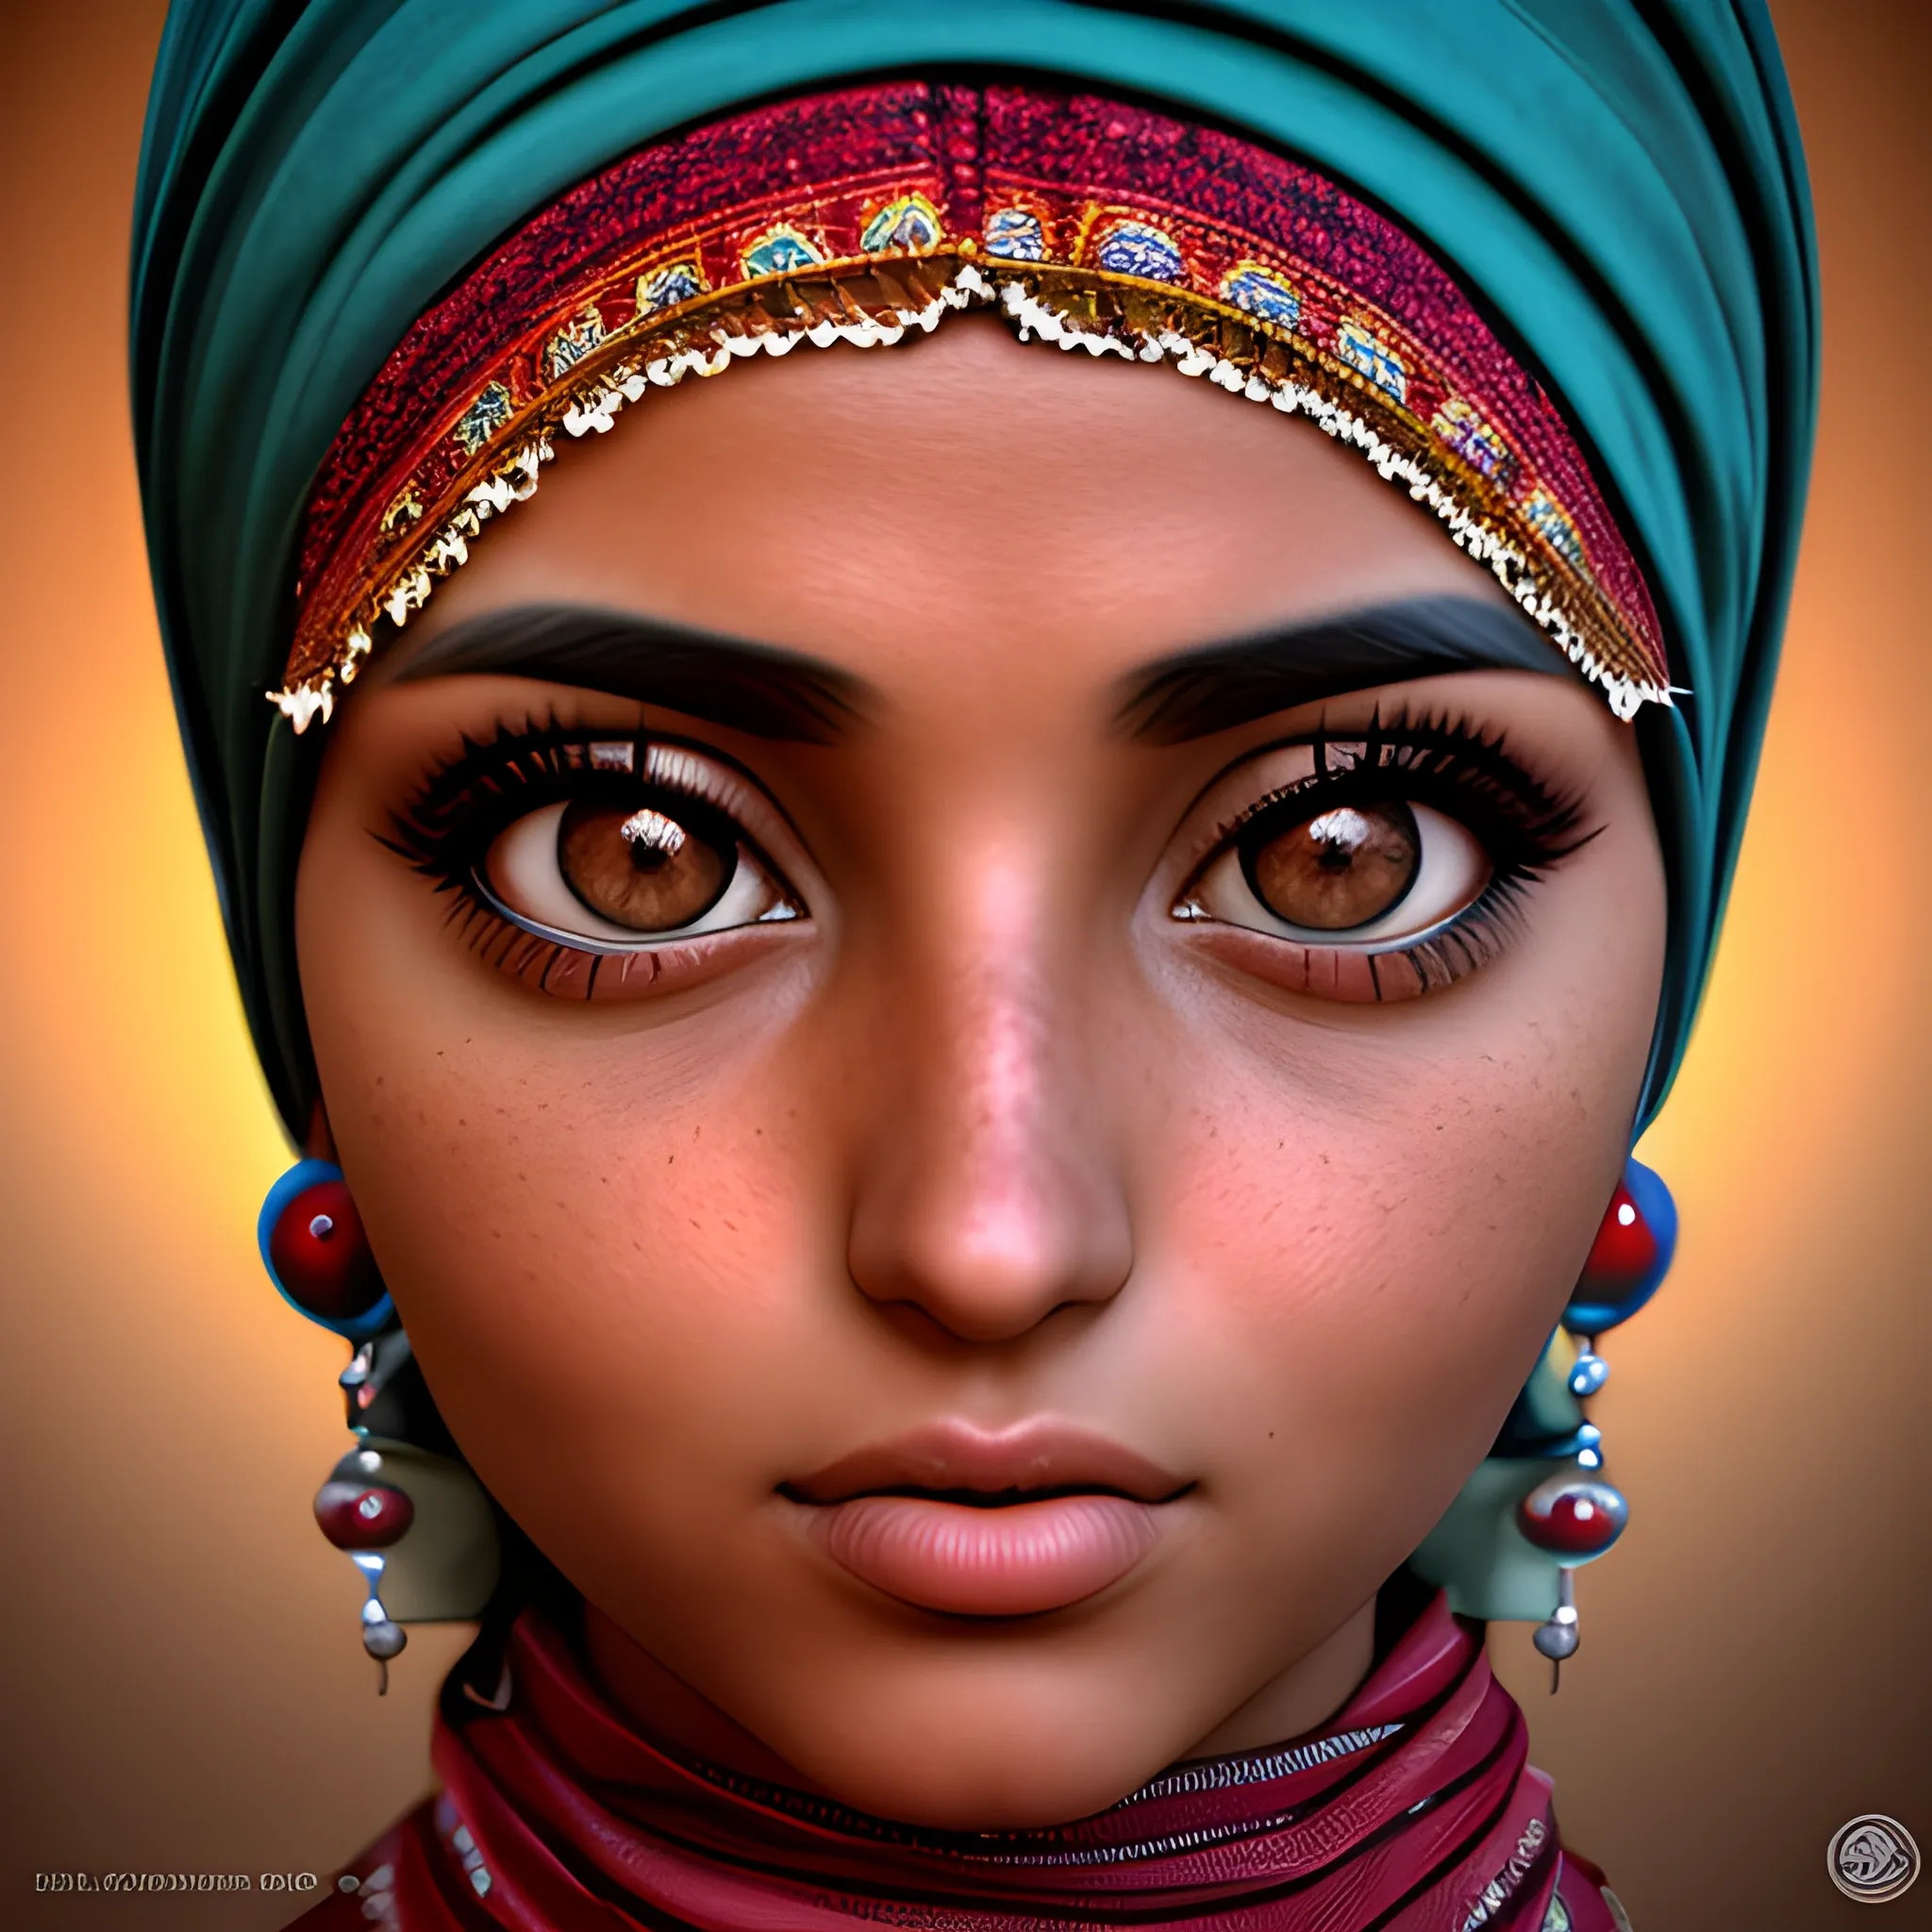 Moroccan beauty, big eyes, extreme picture quality, ambient light, 3D